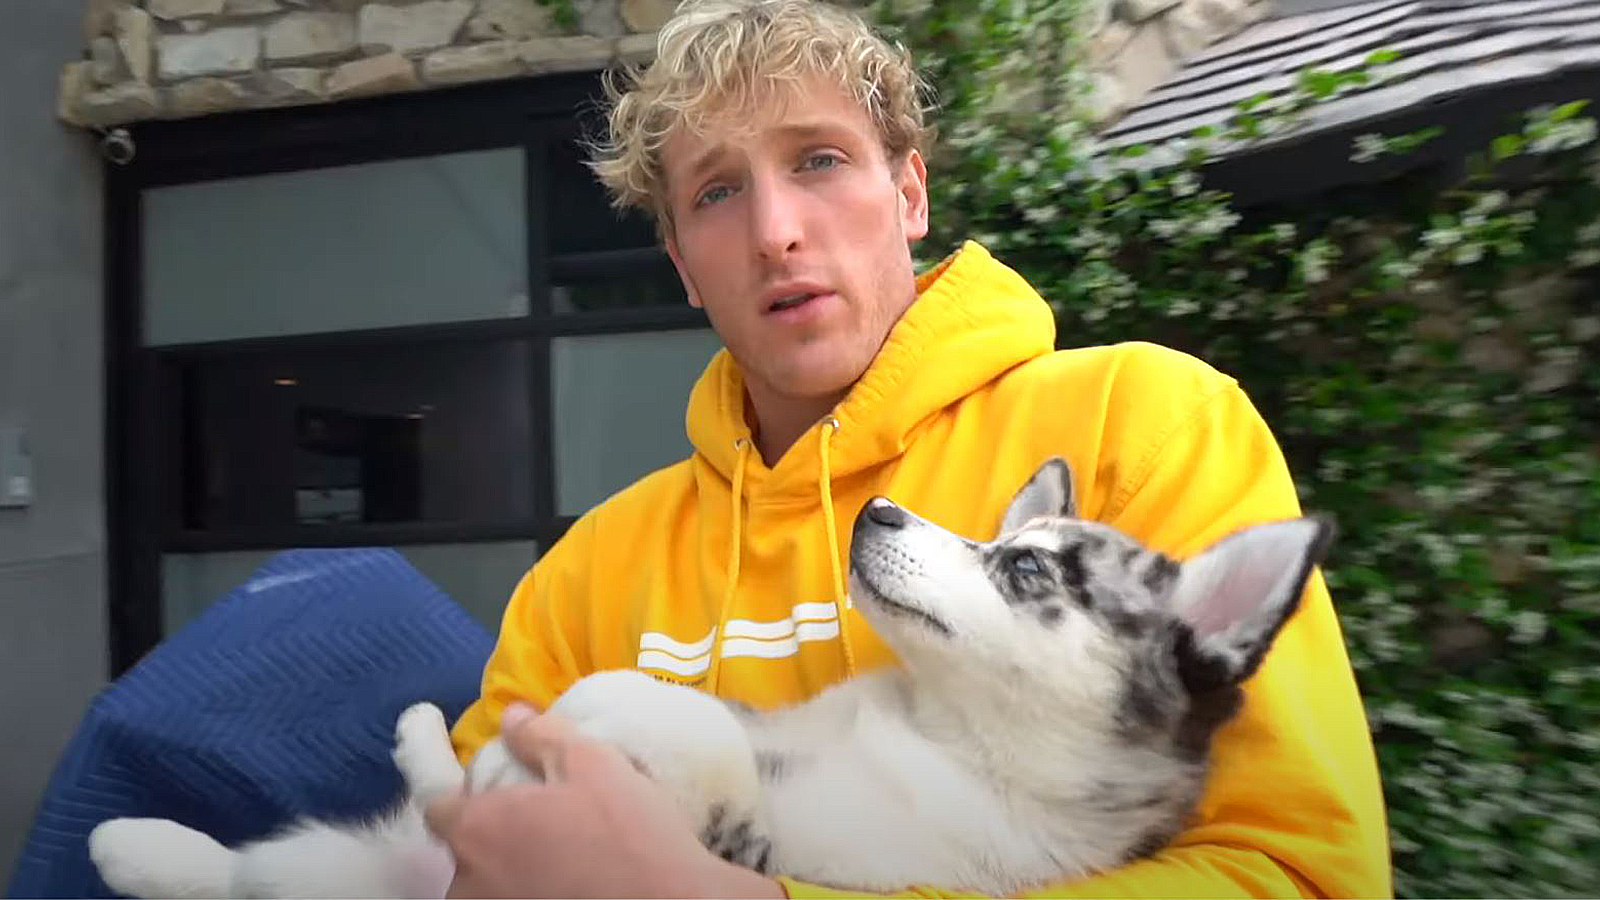 Logan Paul denies accusations that he pushed his dog into a lake - Dexerto